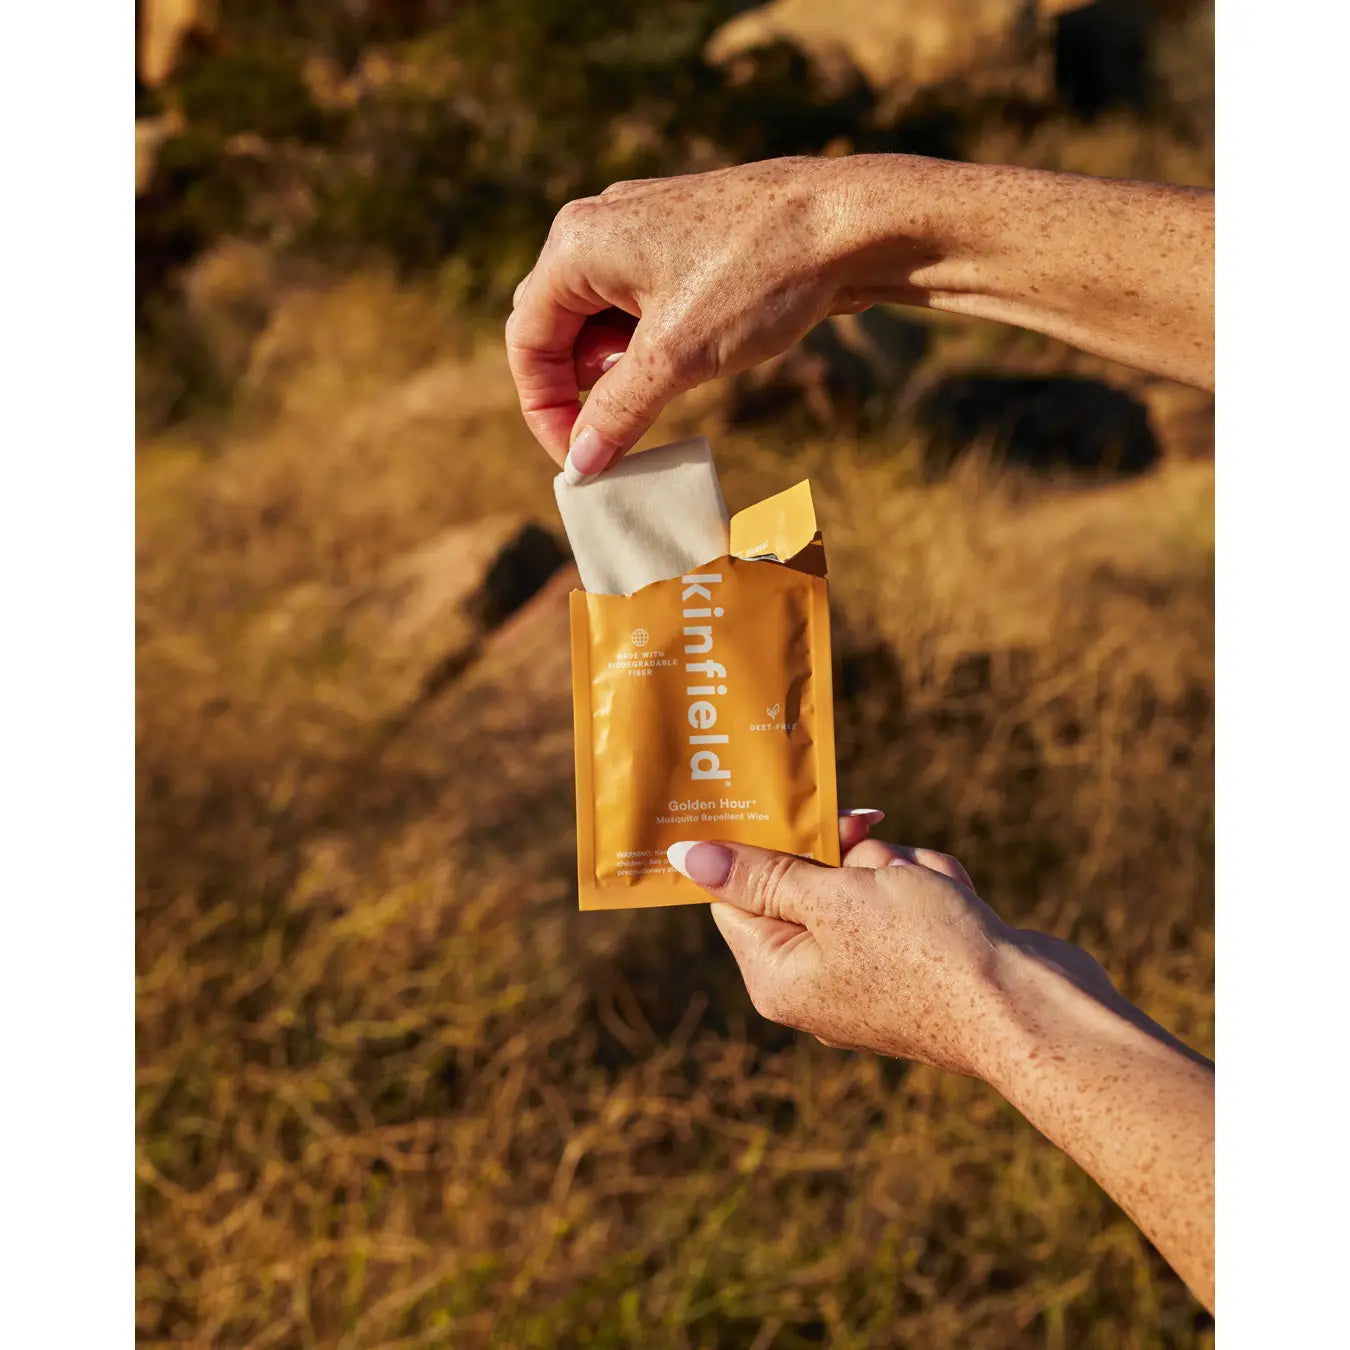 Golden Hour Mosquito Wipes by Kinfield